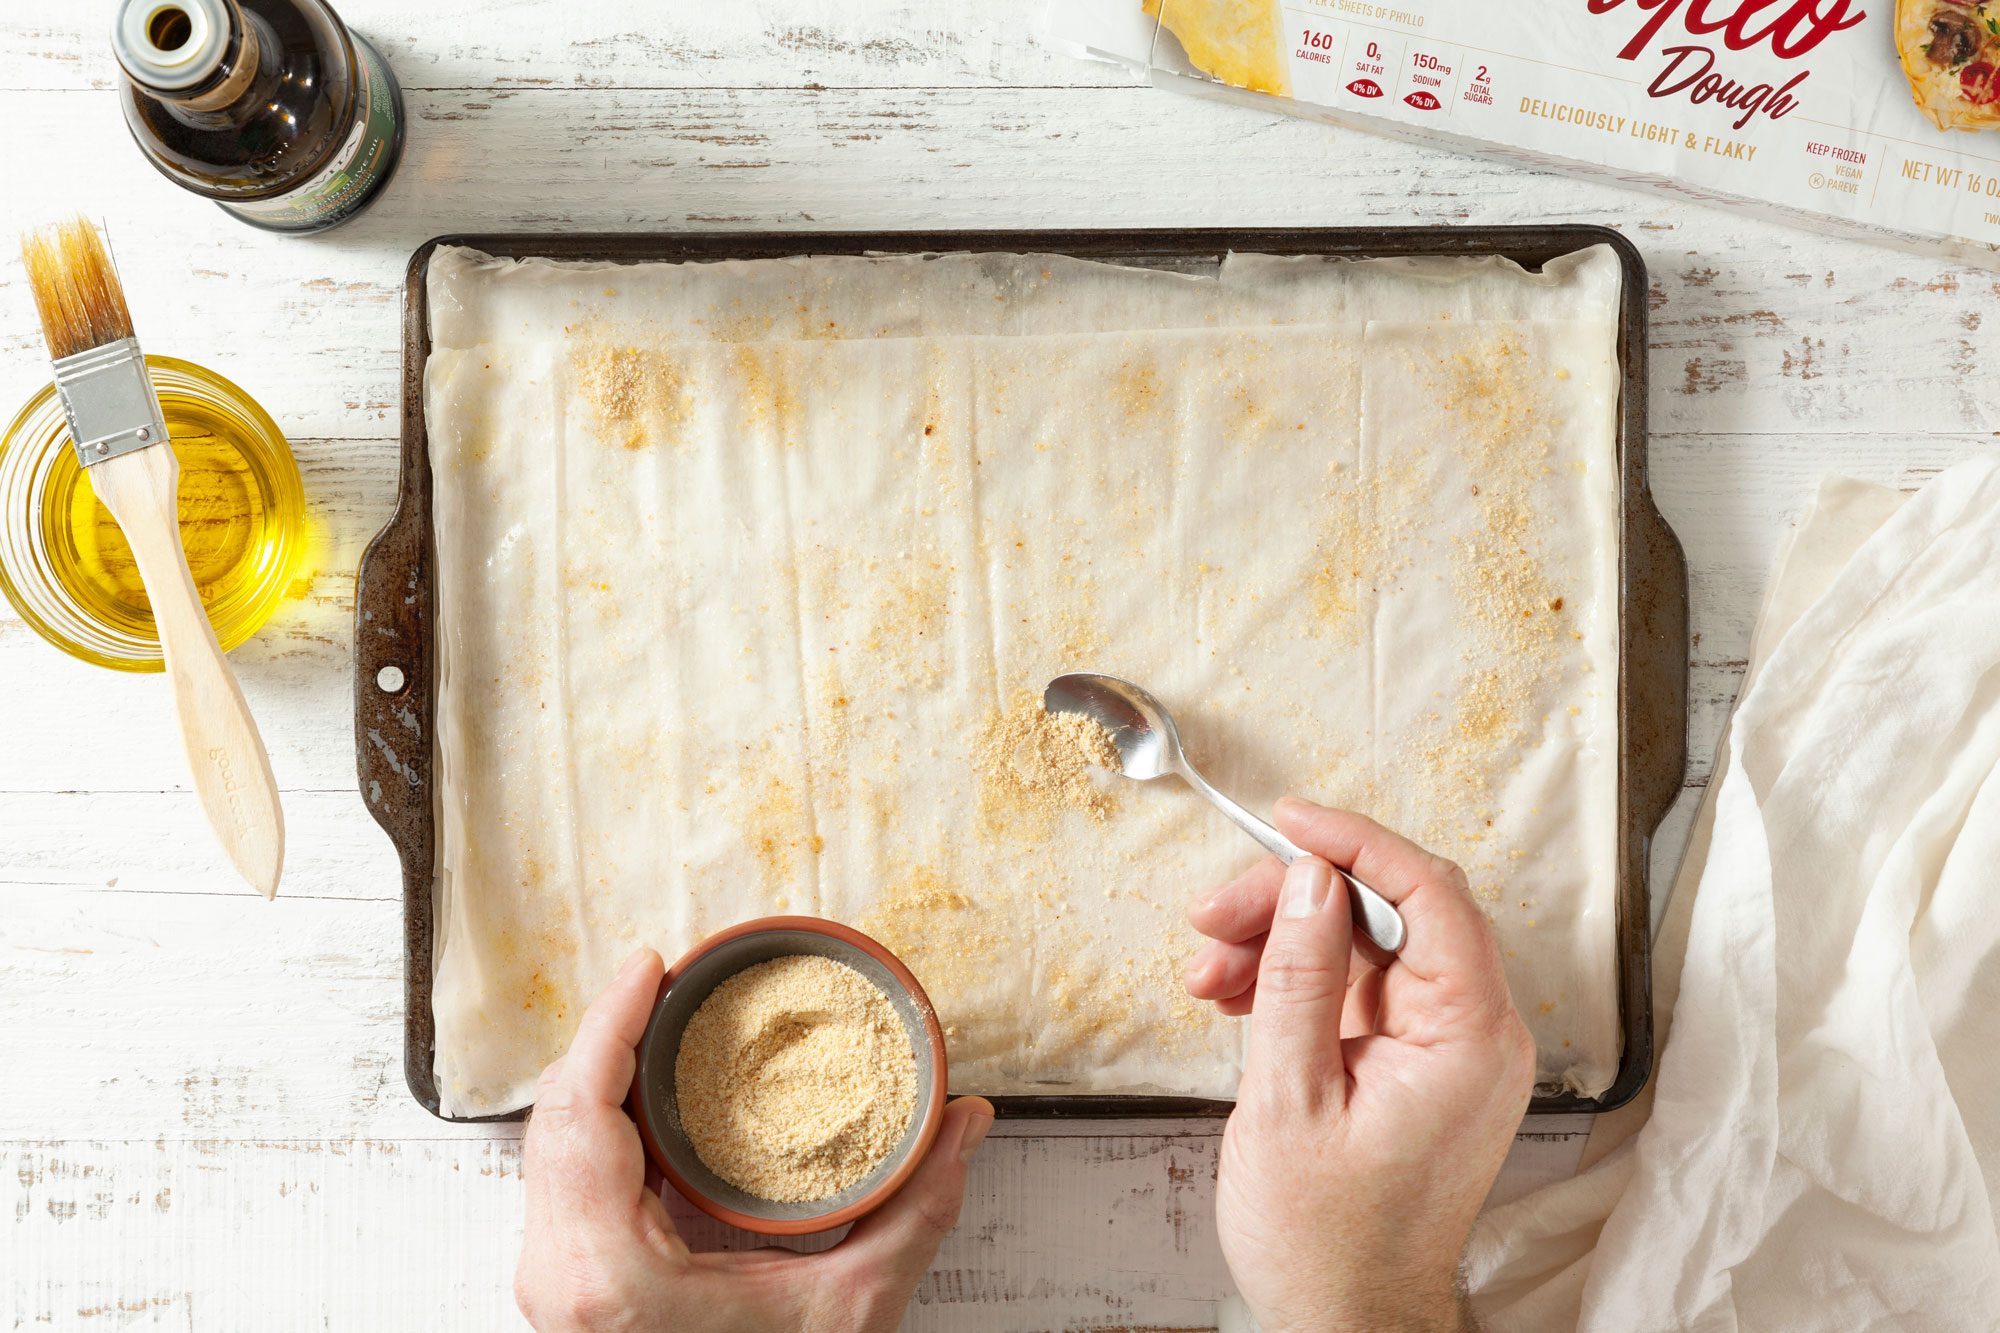 Start brushing phyllo sheet with oil and bread crumbs